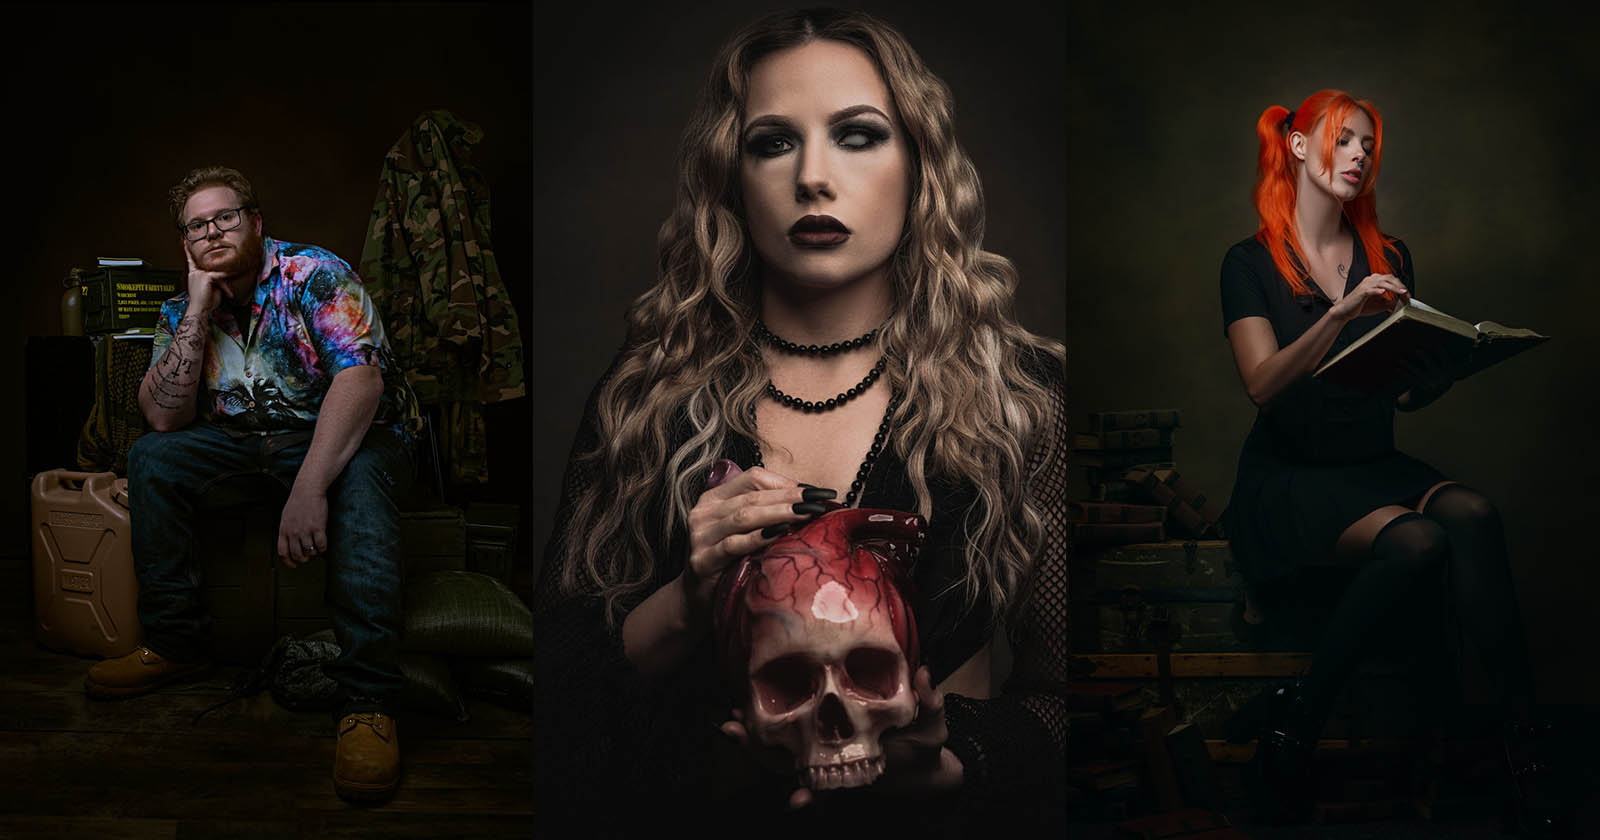 Why You Should Commit in Exclusive Props to Shoot Portraits That Stand Out